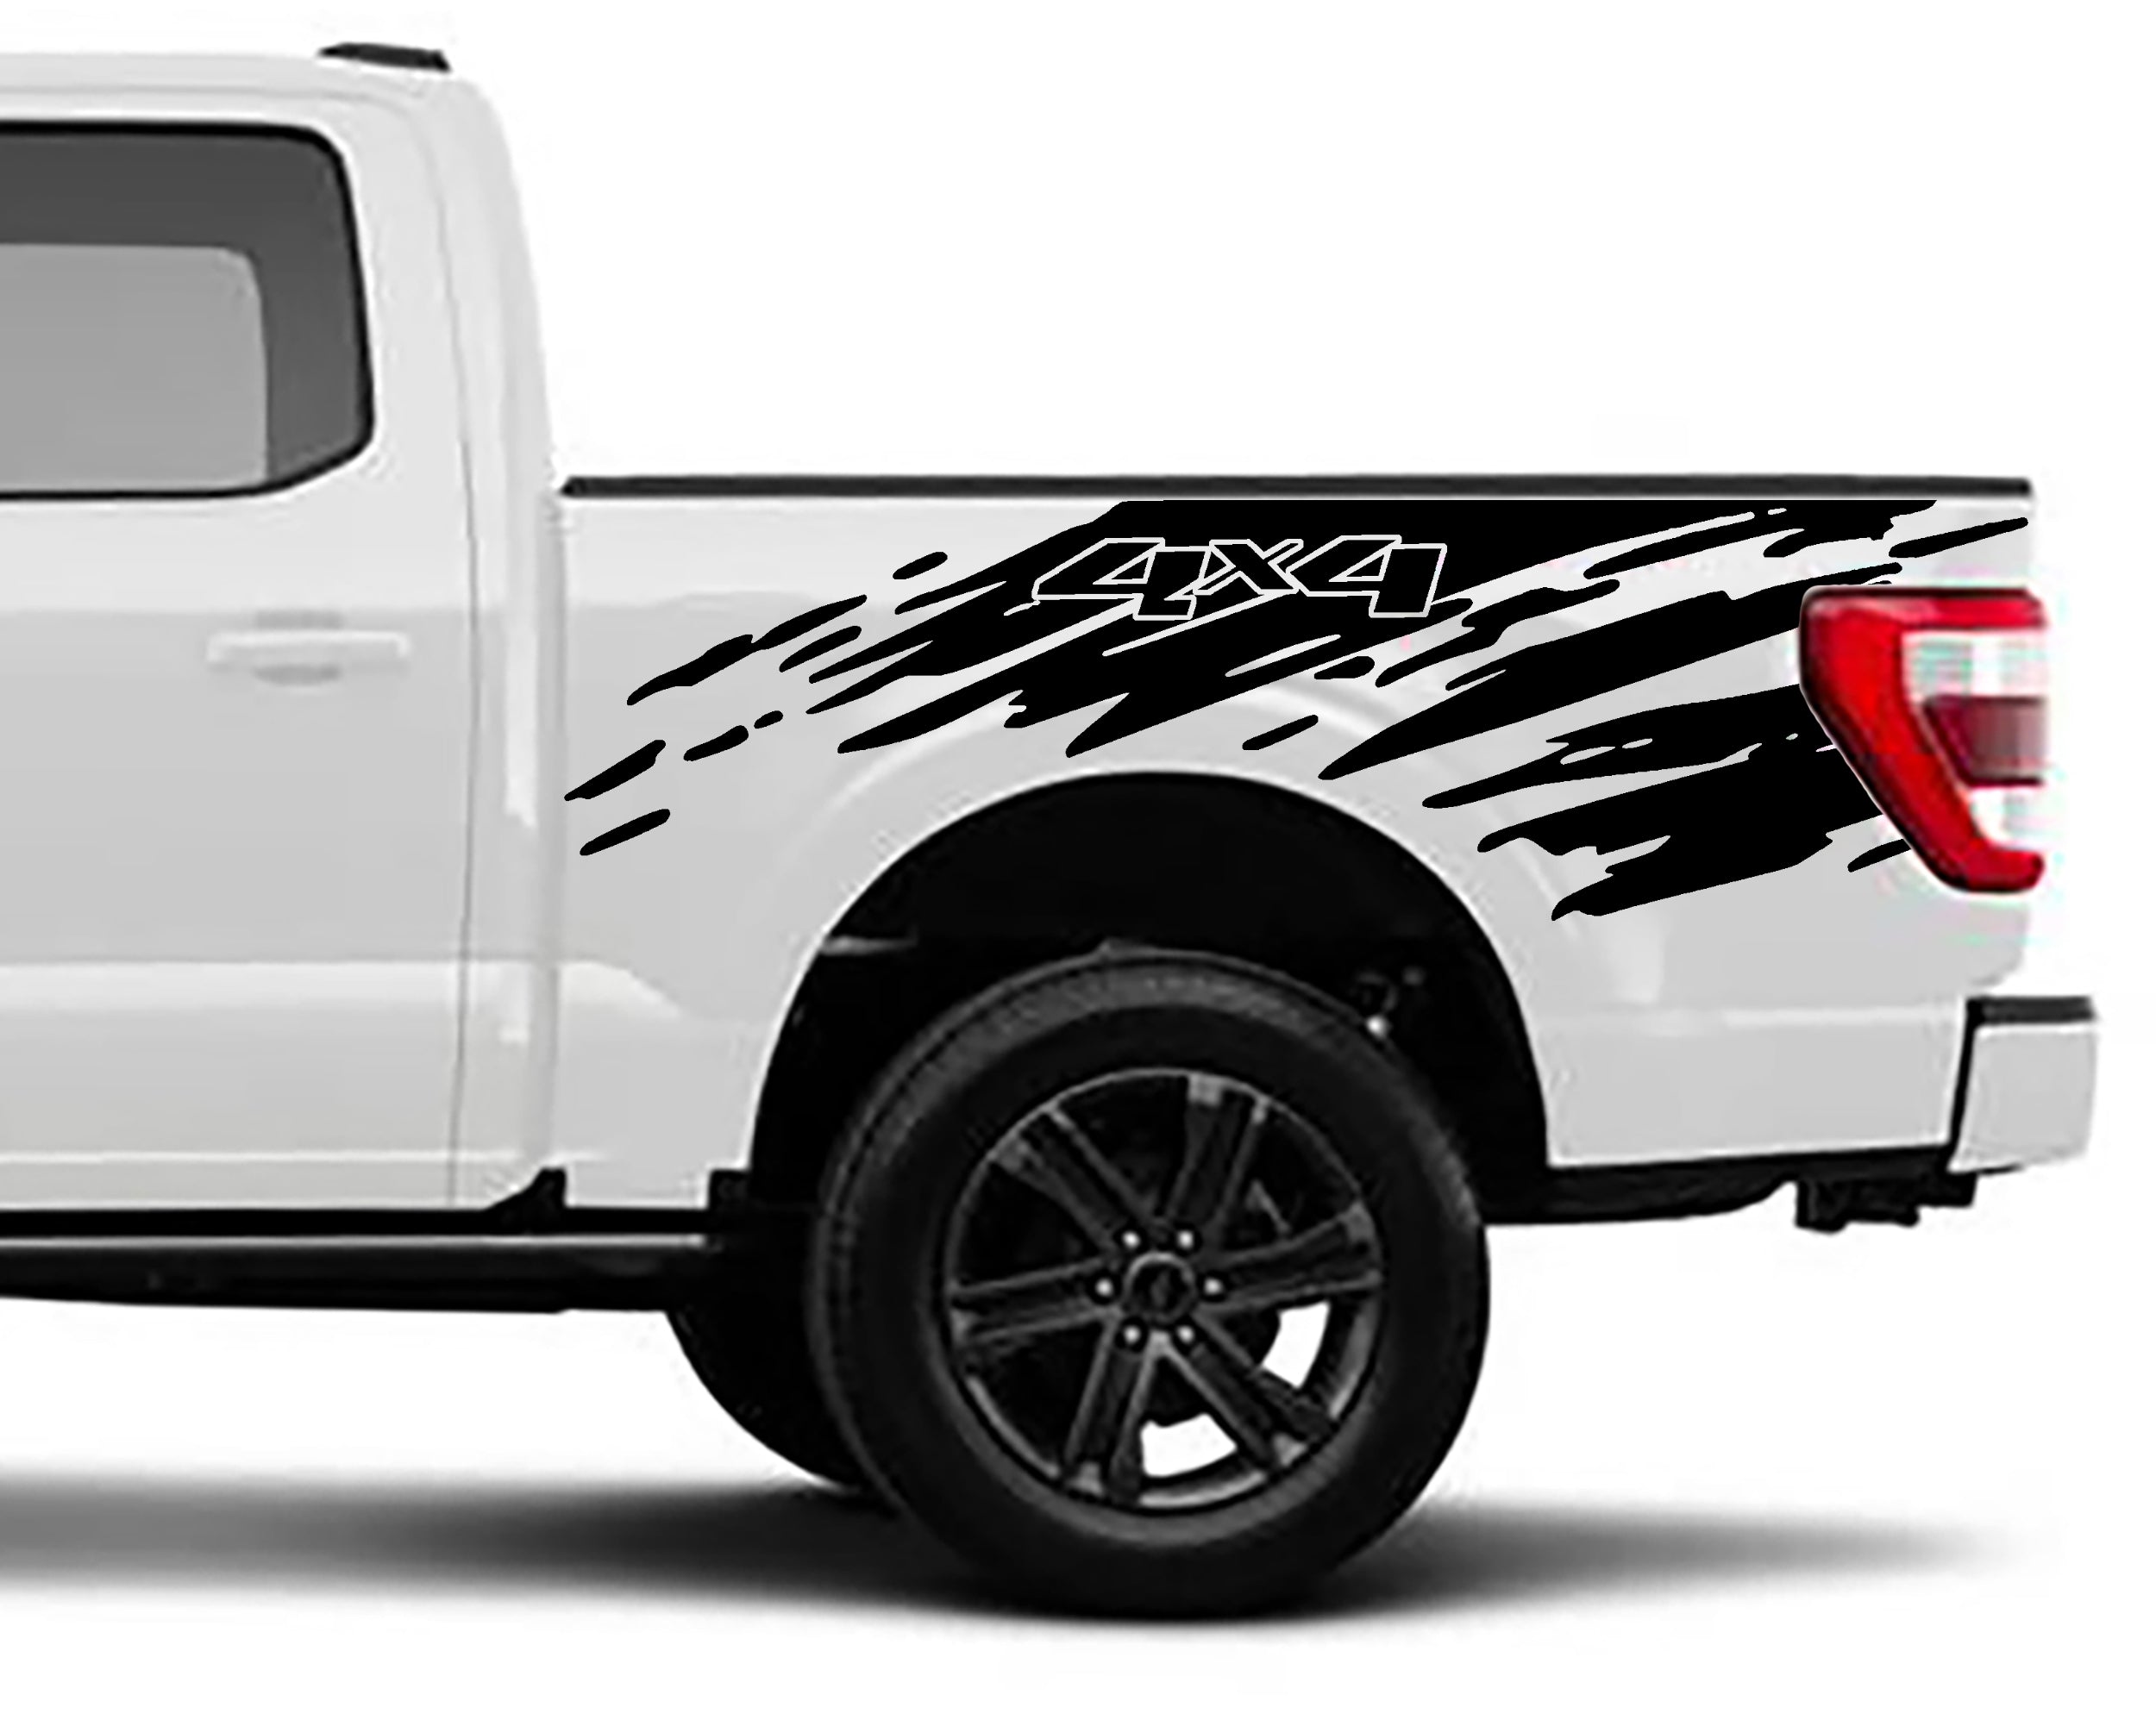 Ford F-150 4x4 Mud Splatter Bed Decals (Pair) : Vinyl Graphics Kit Fits (2021-2023)